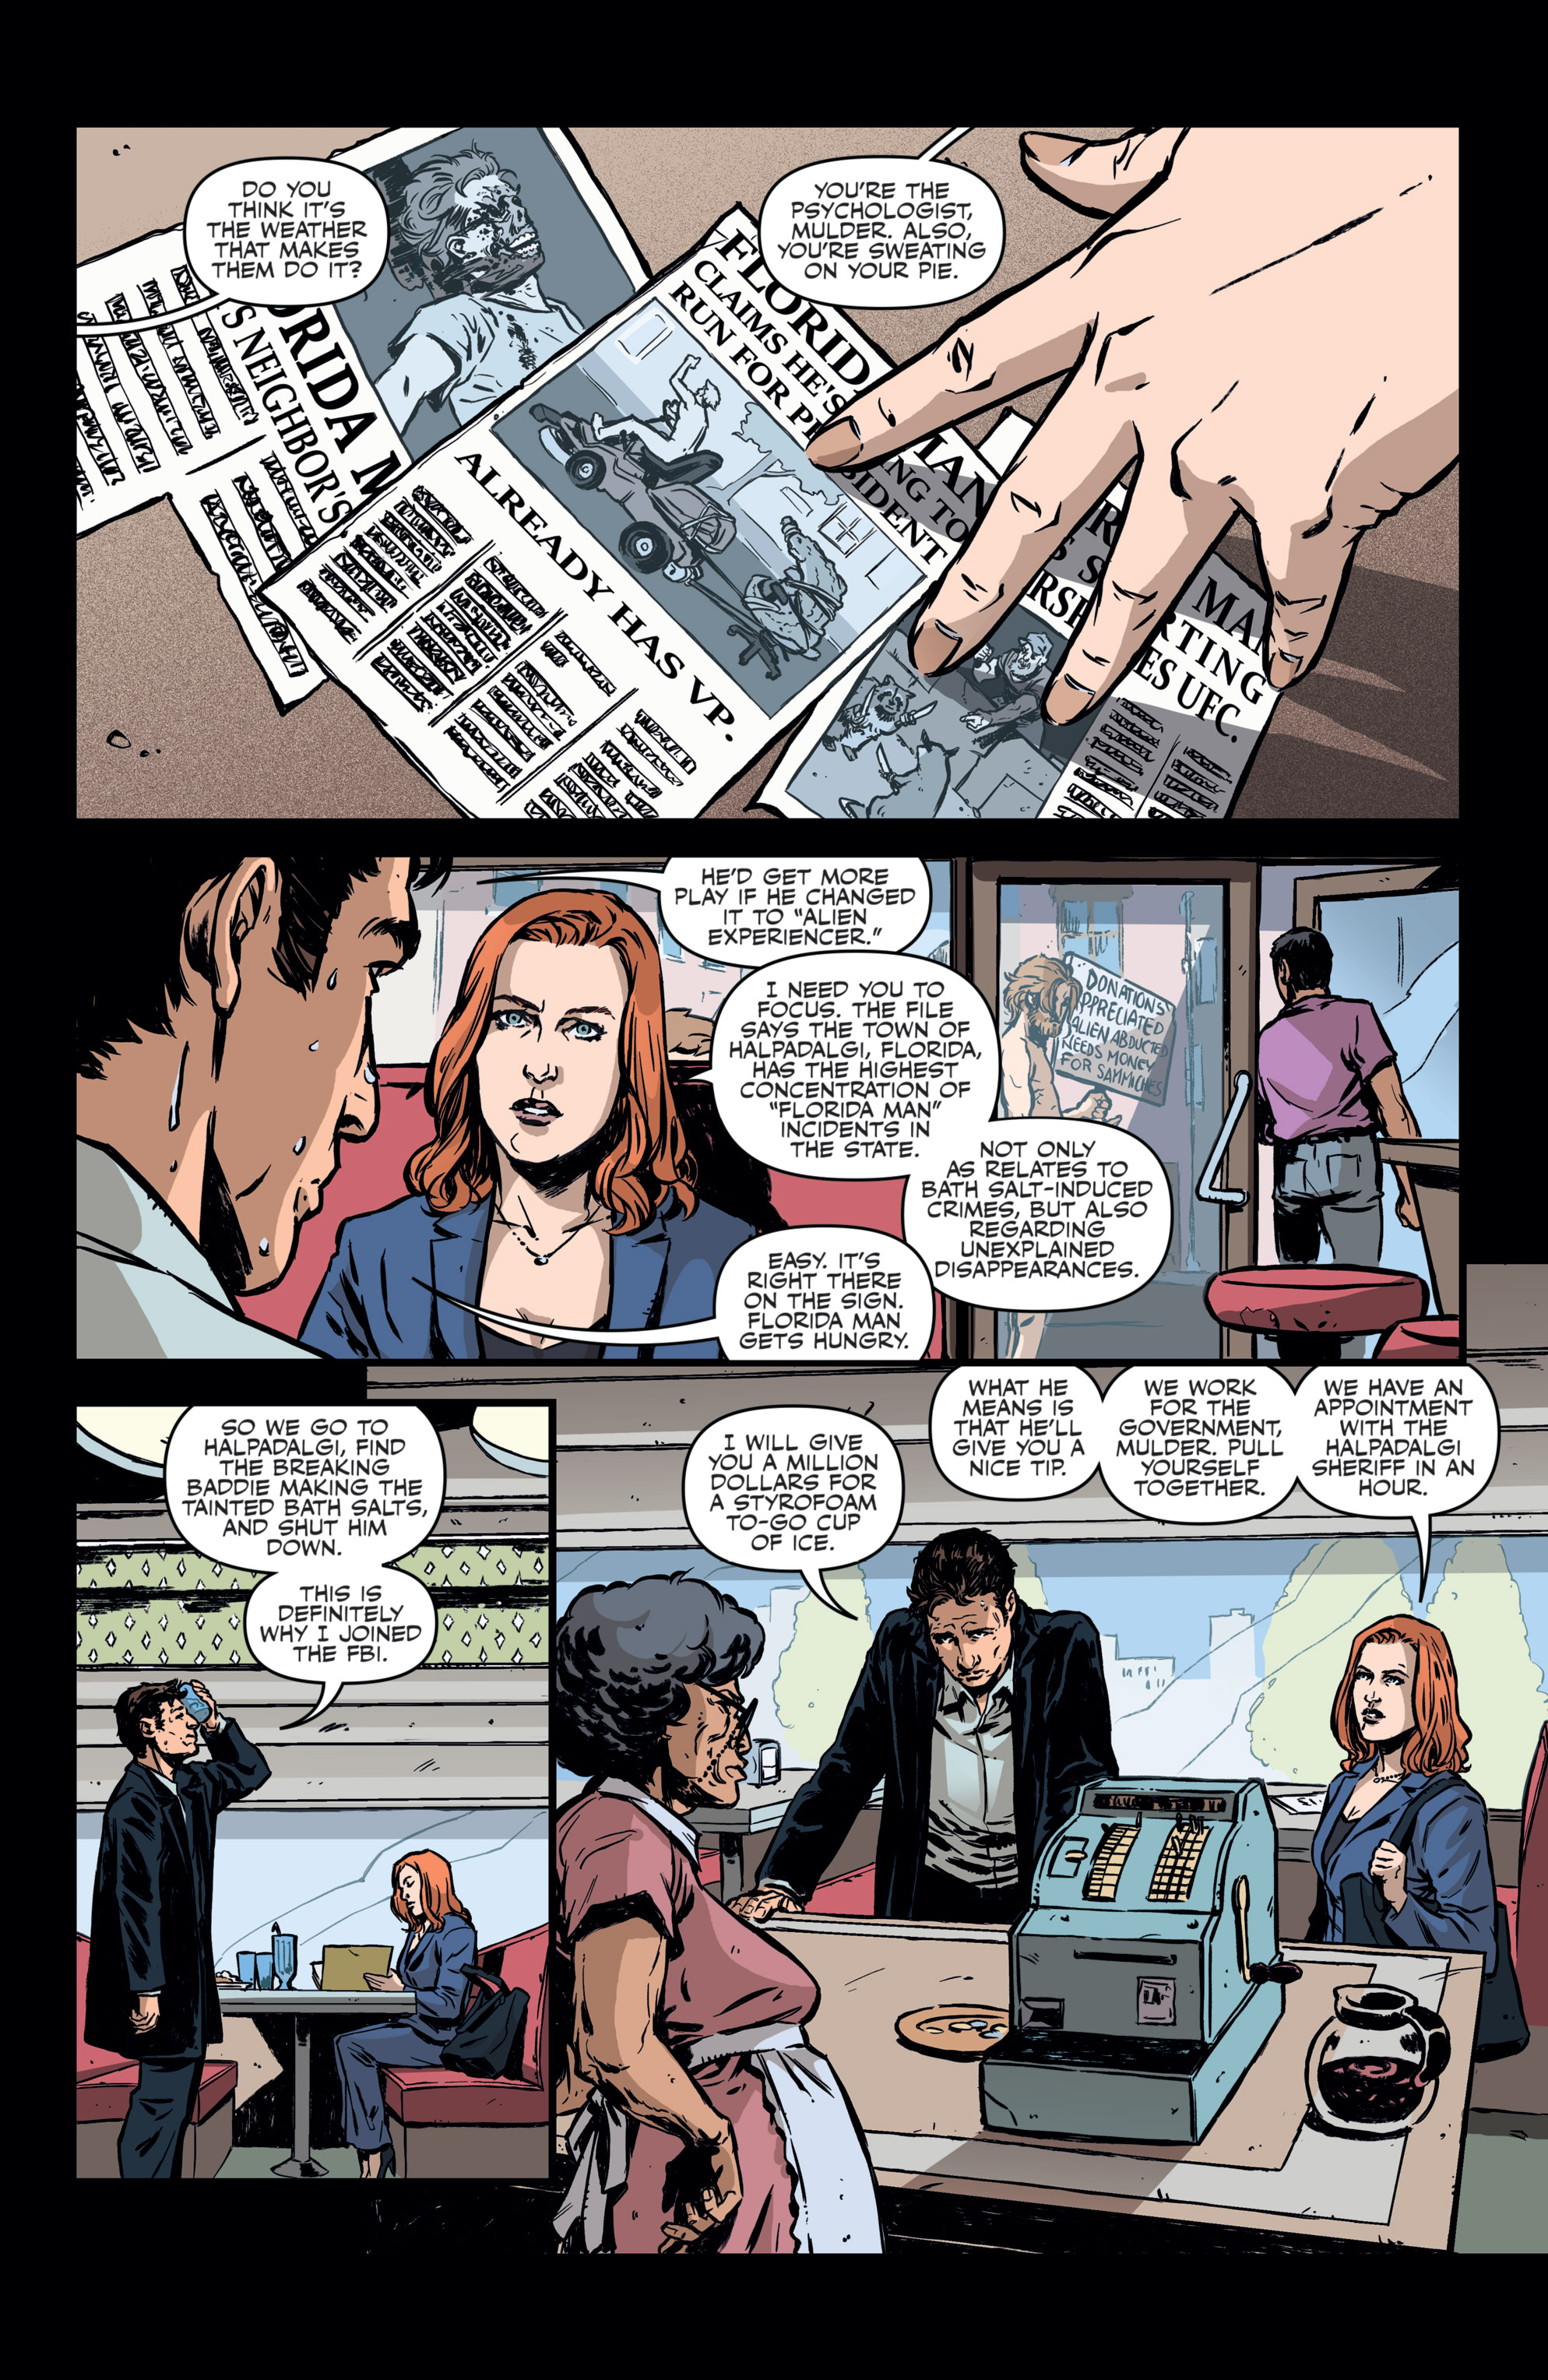 The X-Files: Case Files—Florida Man... (2018-): Chapter 1 - Page 4